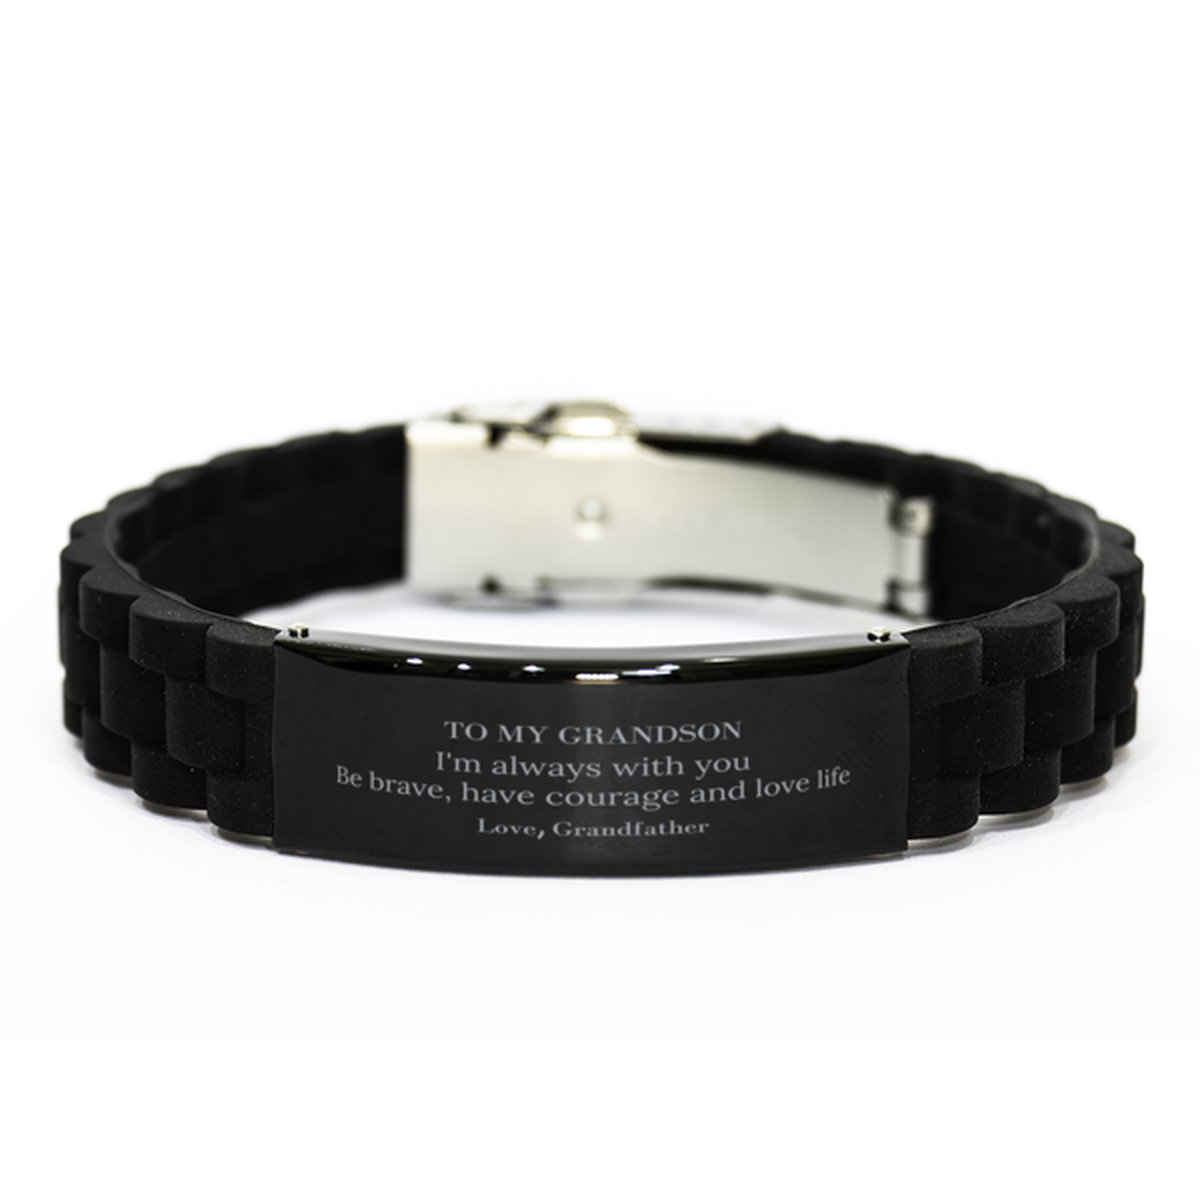 To My Grandson Gifts from Grandfather, Unique Black Glidelock Clasp Bracelet Inspirational Christmas Birthday Graduation Gifts for Grandson I'm always with you. Be brave, have courage and love life. Love, Grandfather